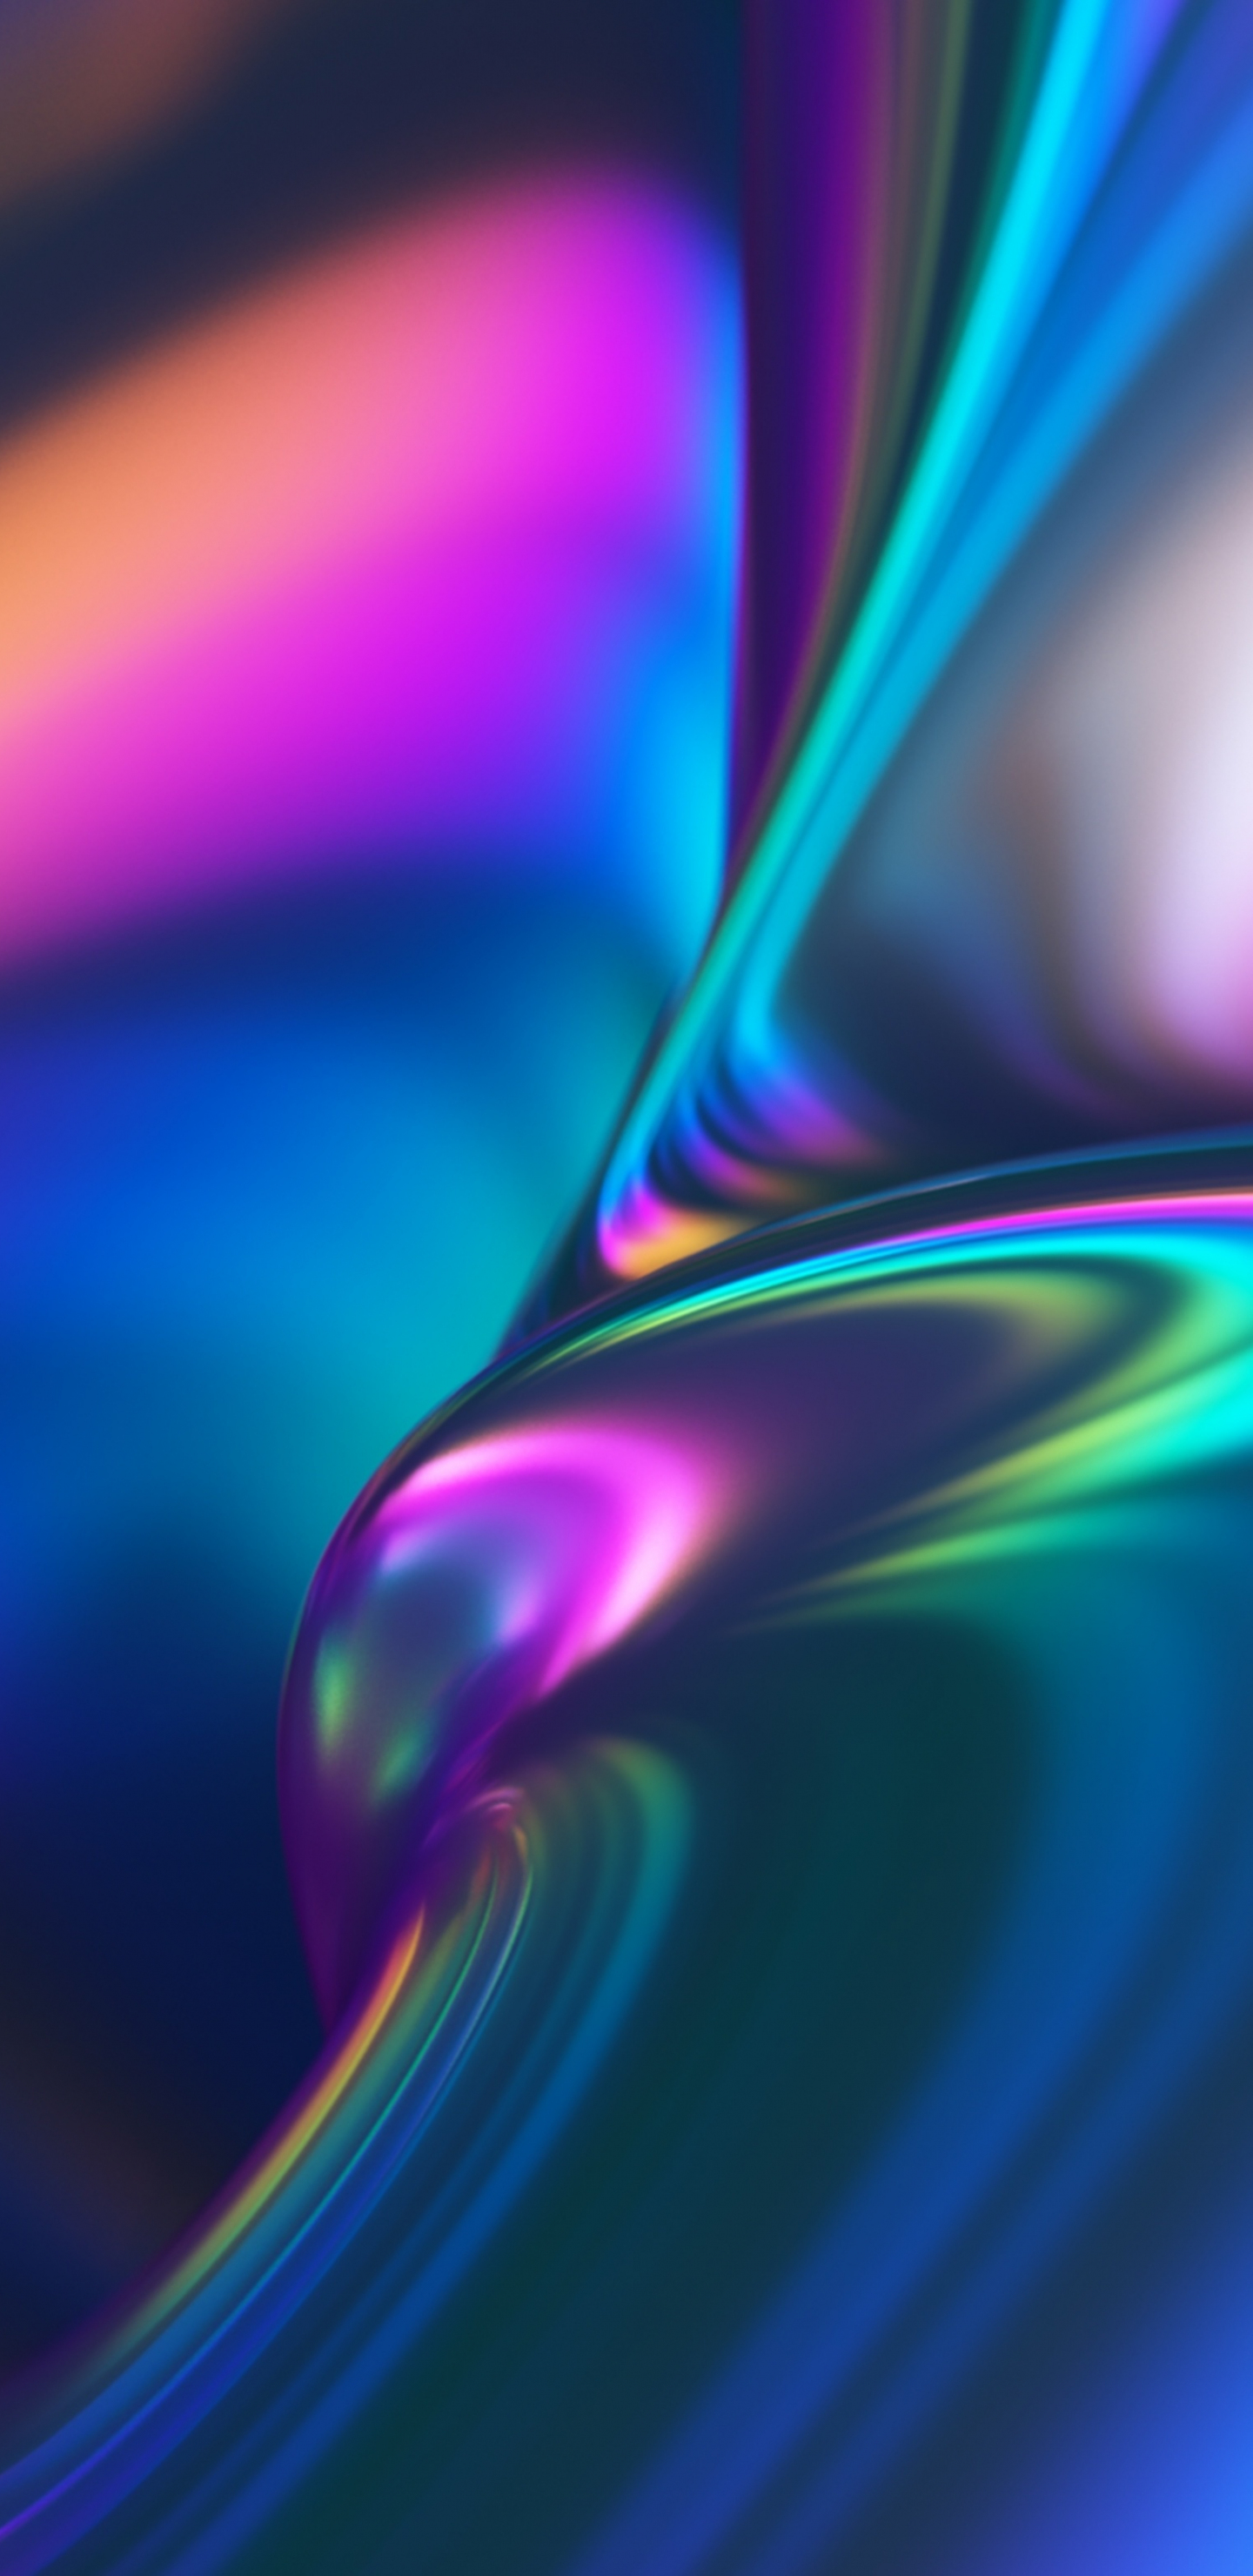 34290 Rainbow Galaxy Background Images Stock Photos  Vectors   Shutterstock